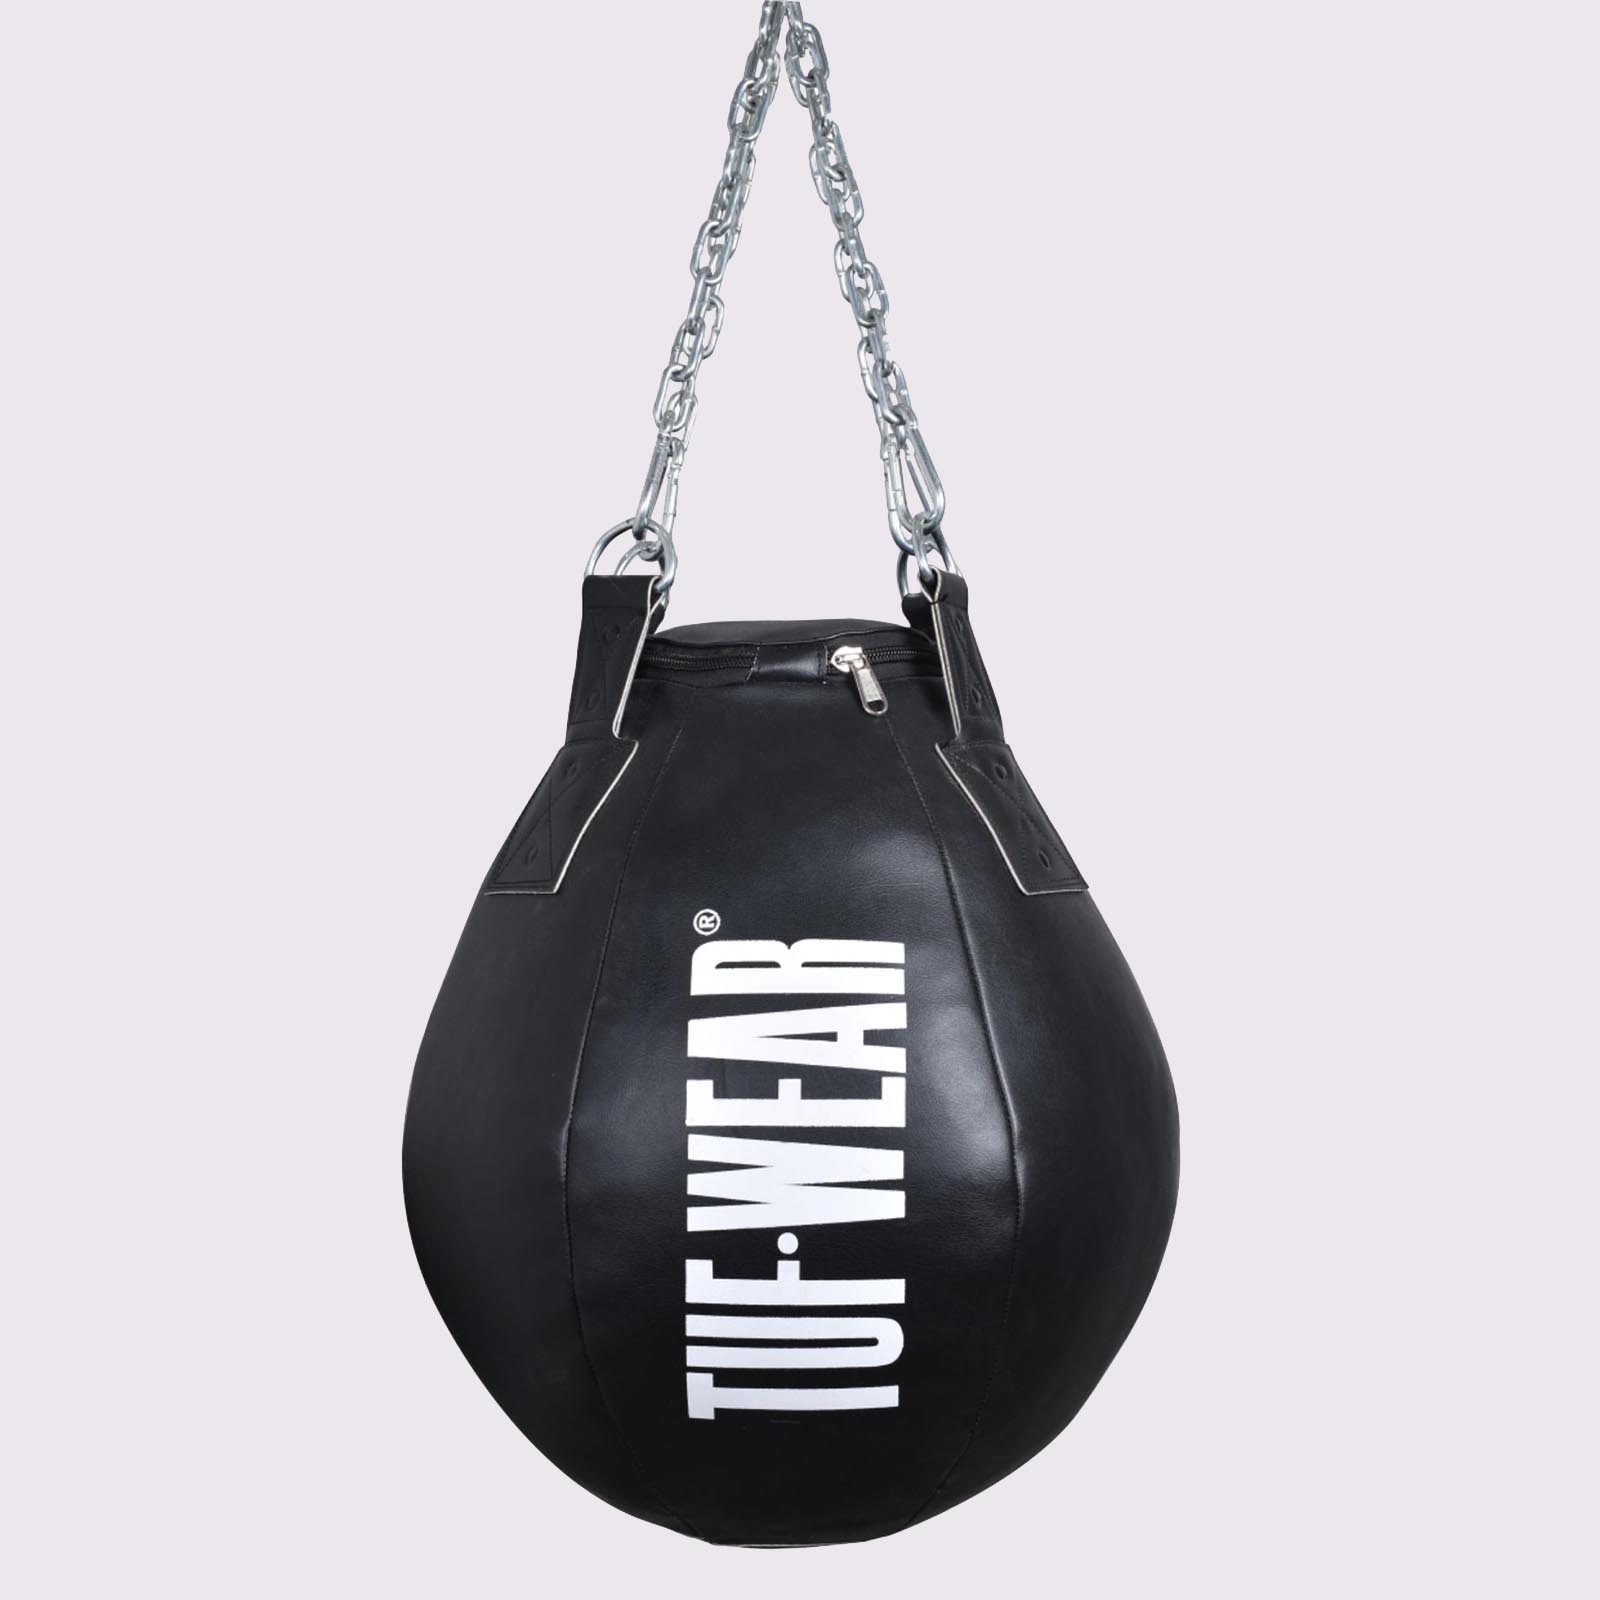 TUF WEAR Reaction Boxing Leather Ball Double End Bag